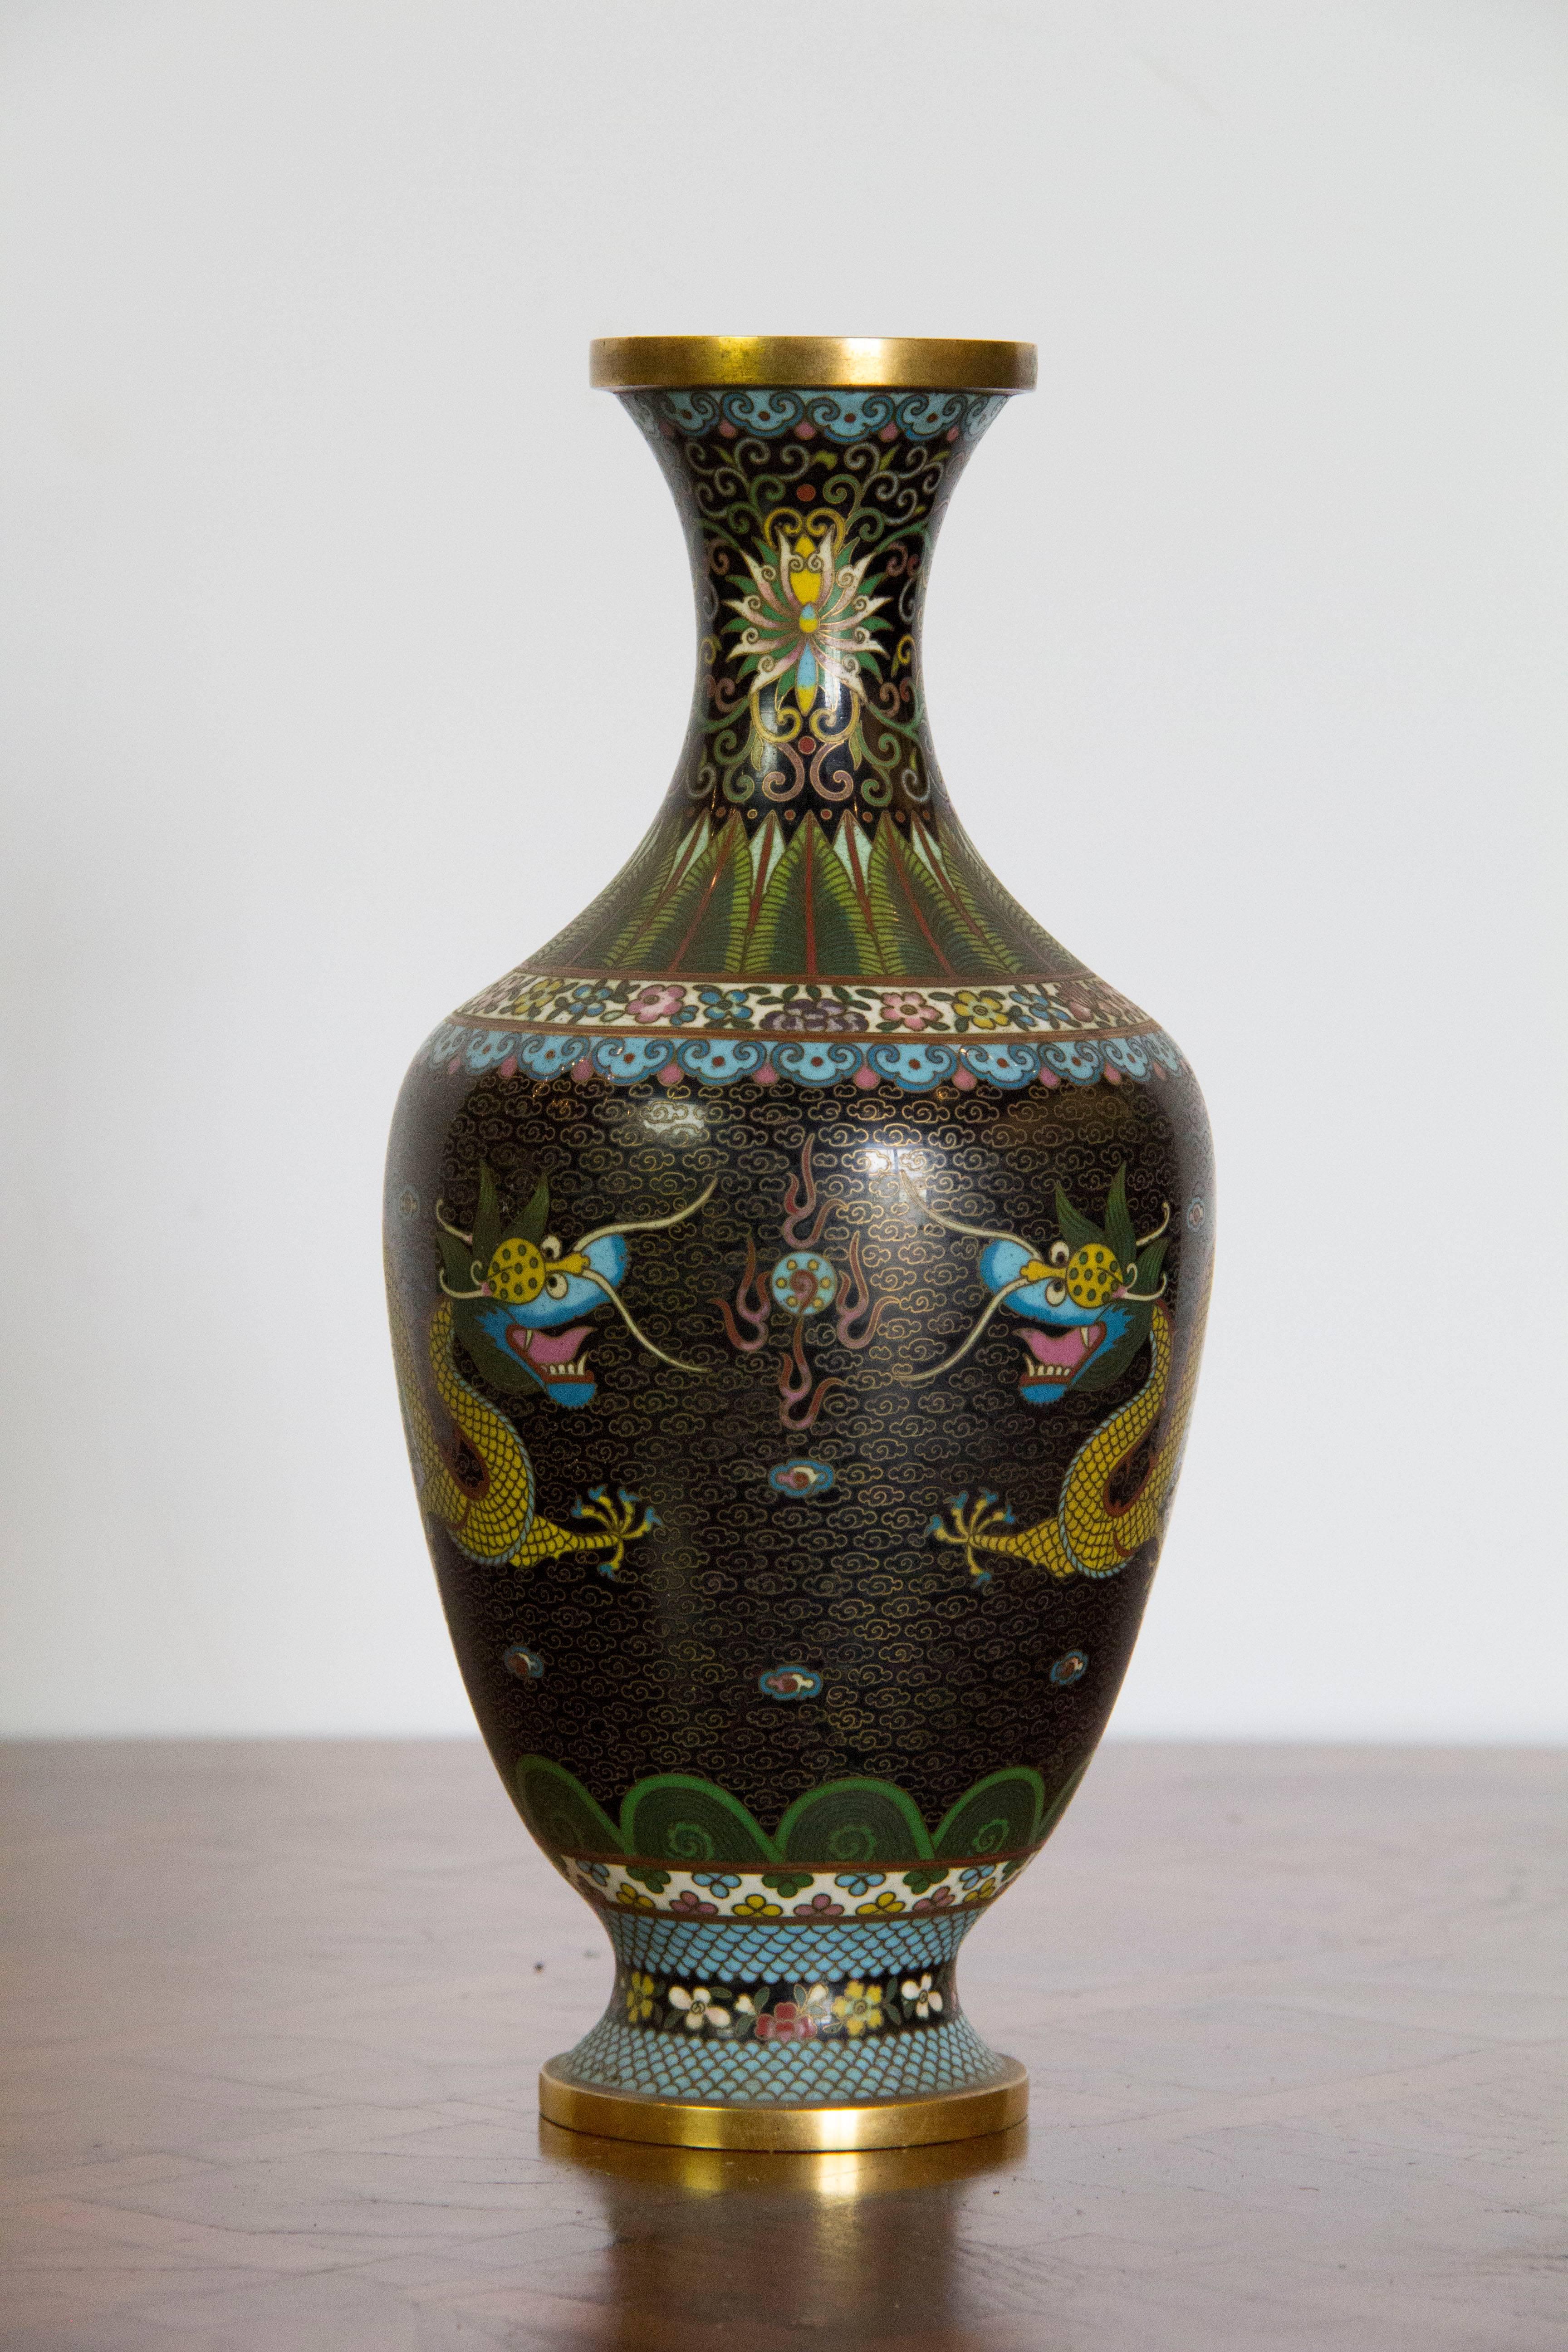 Beautifully detailed cloisonné vase with golden imperial dragon decoration.